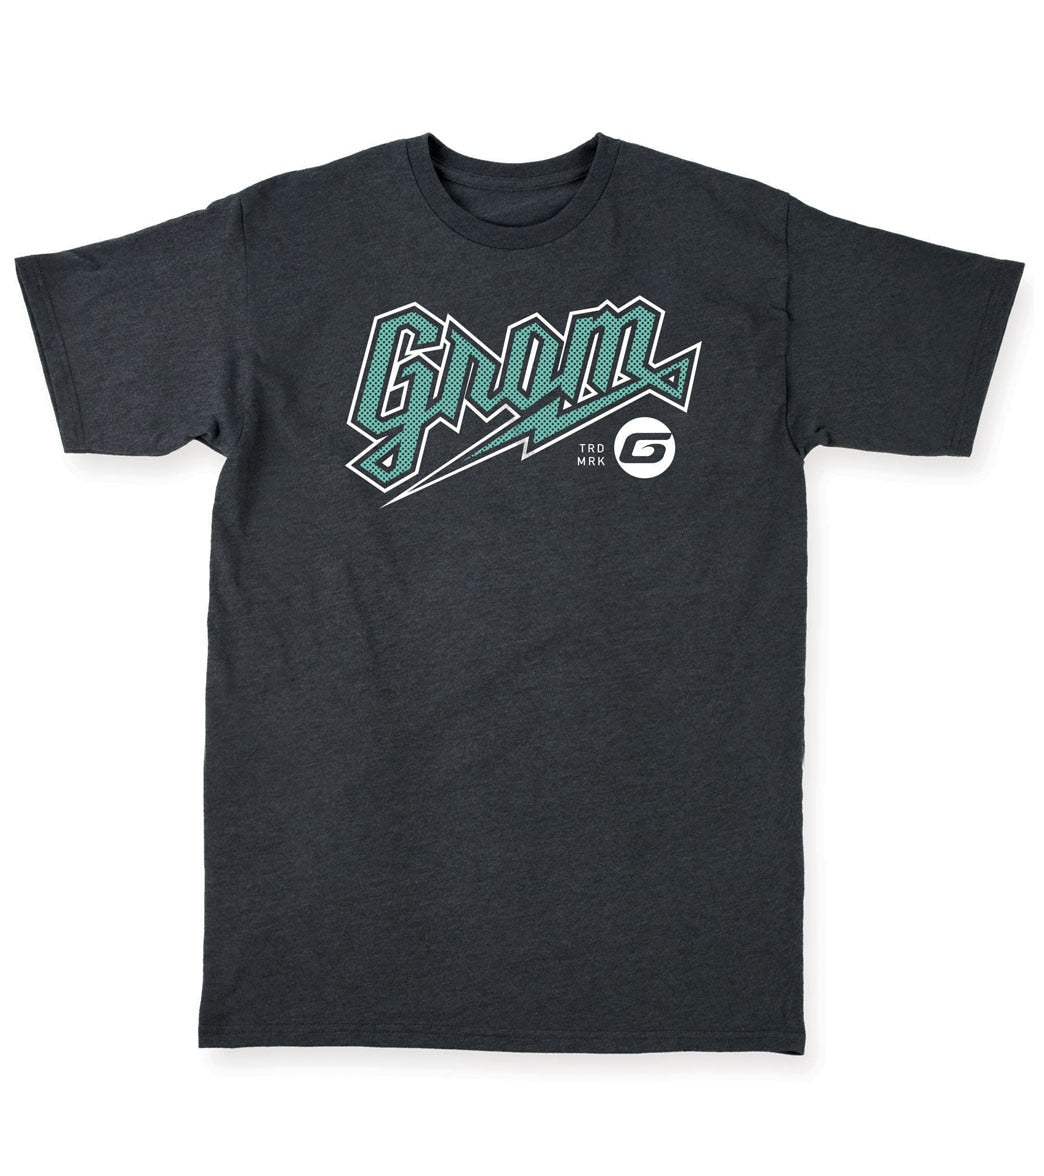 Grom Boy's Mfg. Co Short Sleeve Tee at SwimOutlet.com